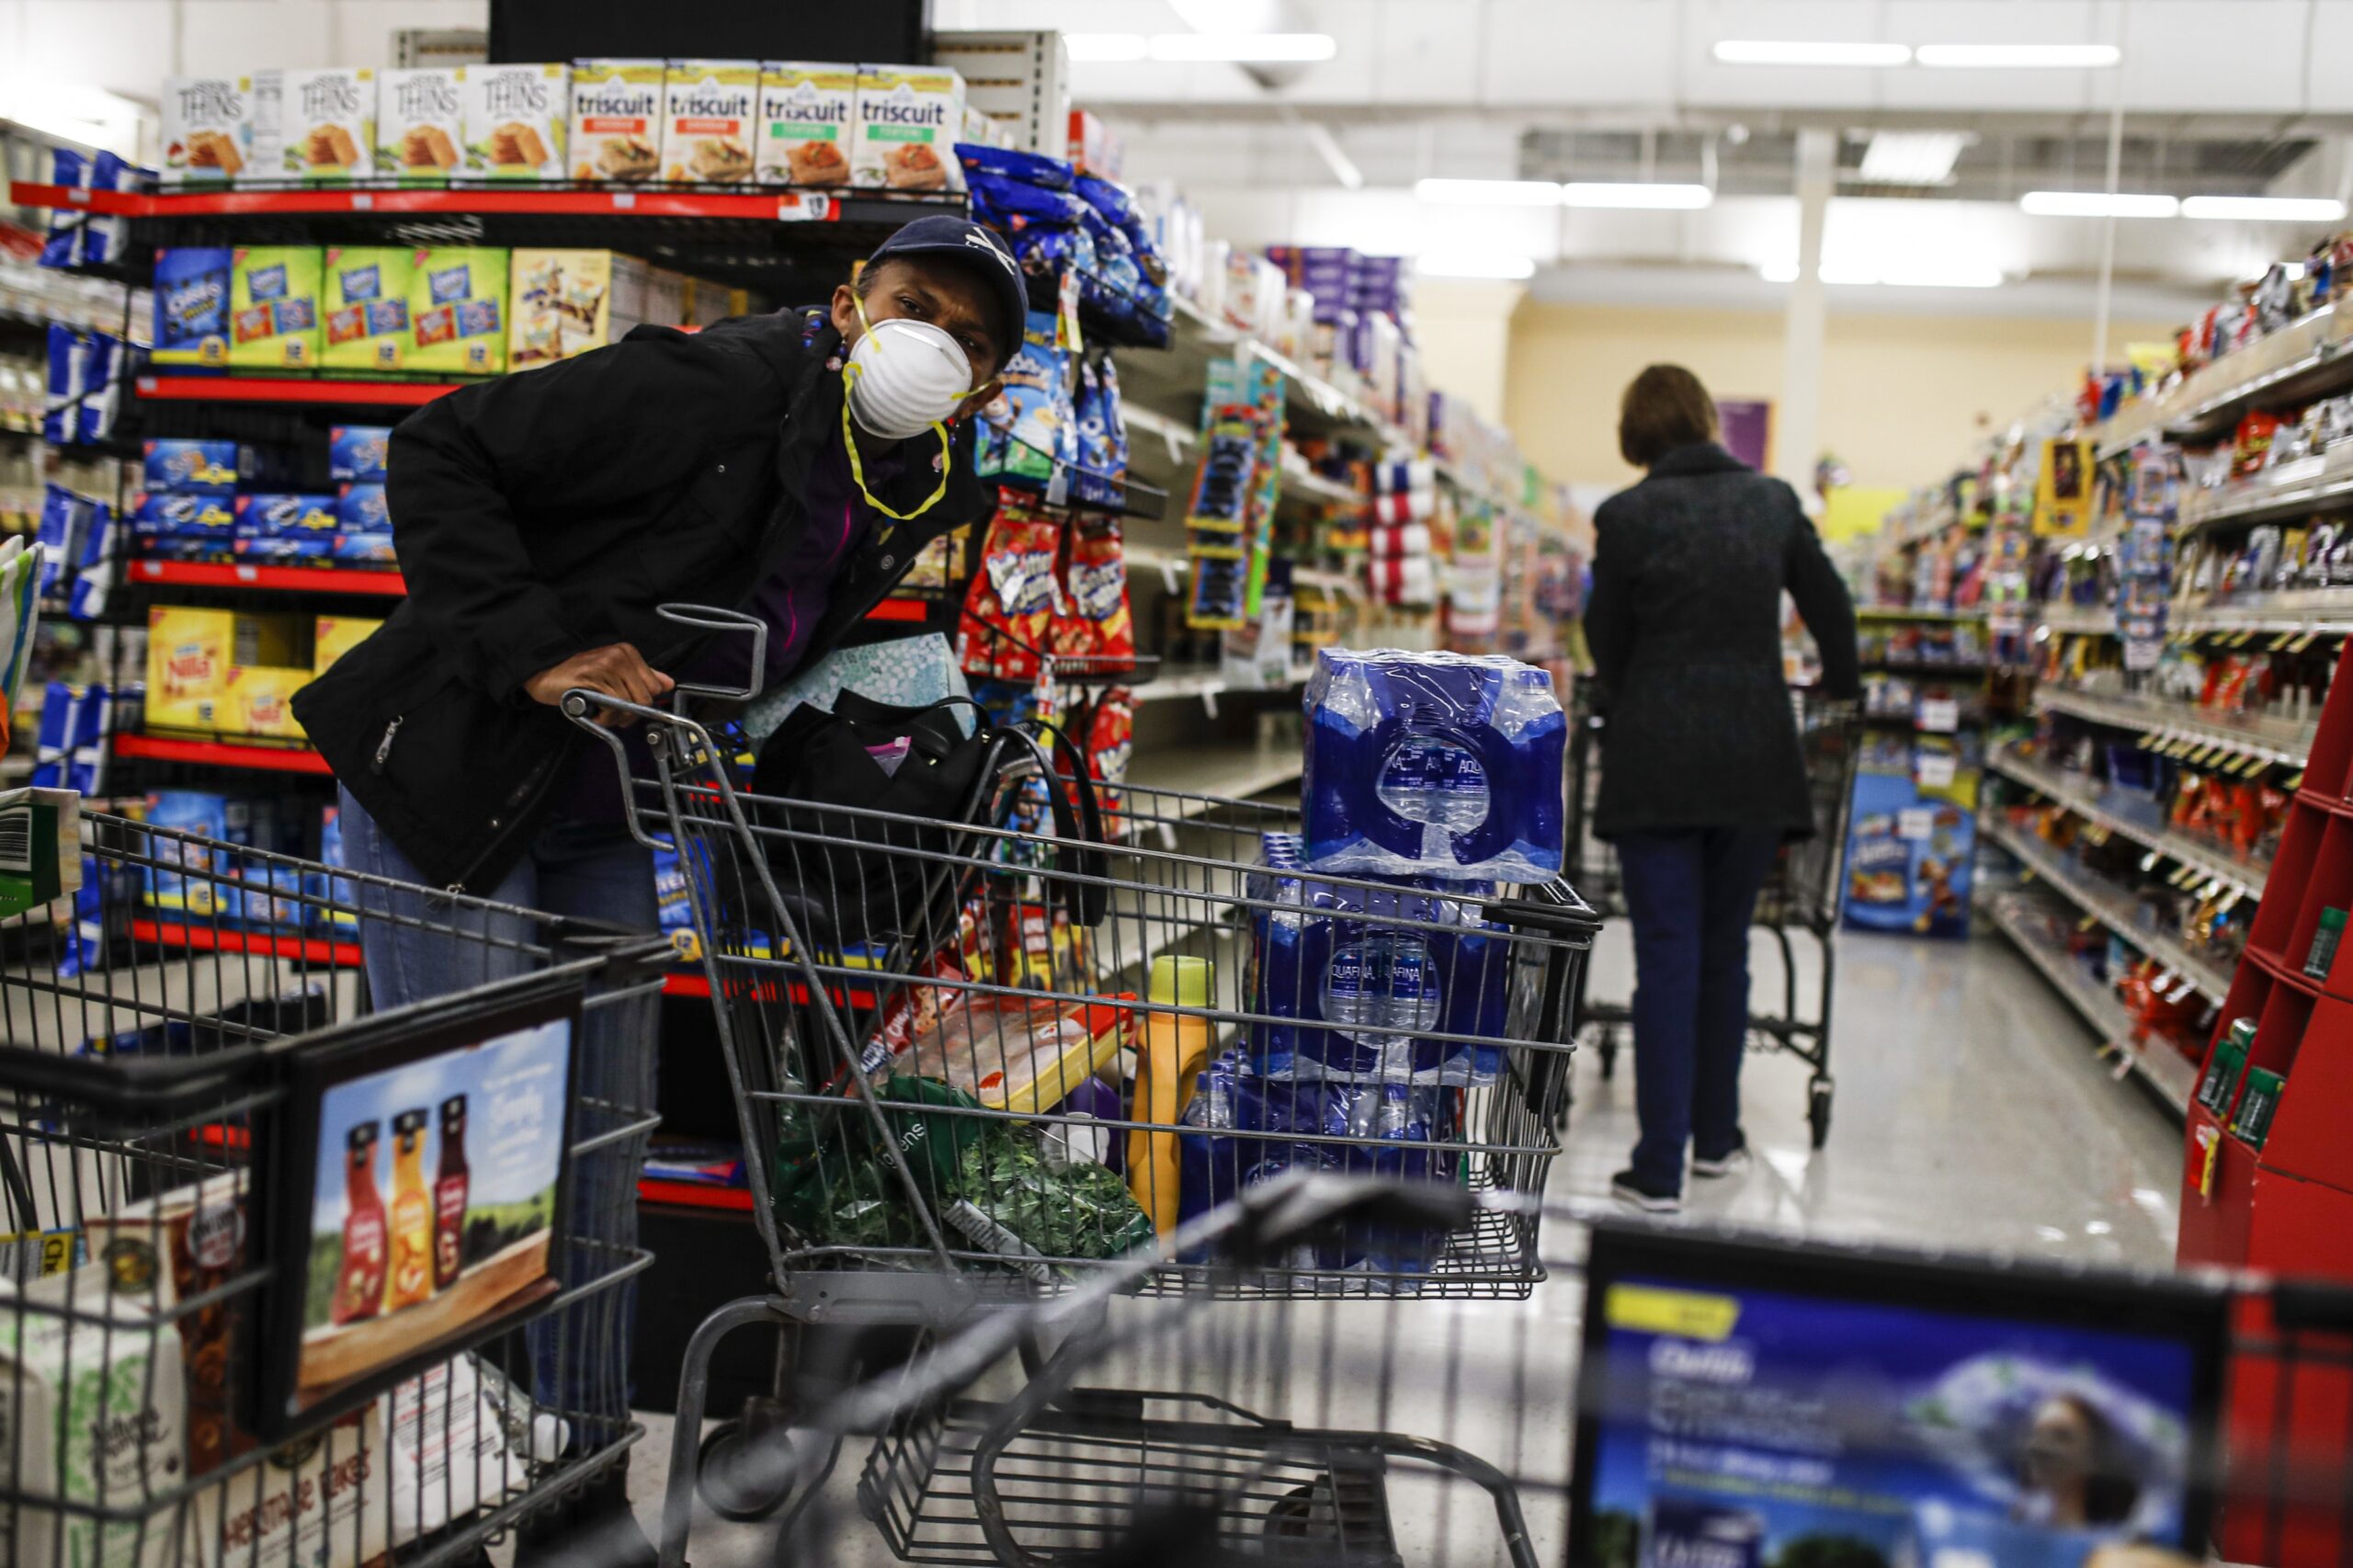 Customers shop at the grocery store during the coronavirus pandemic